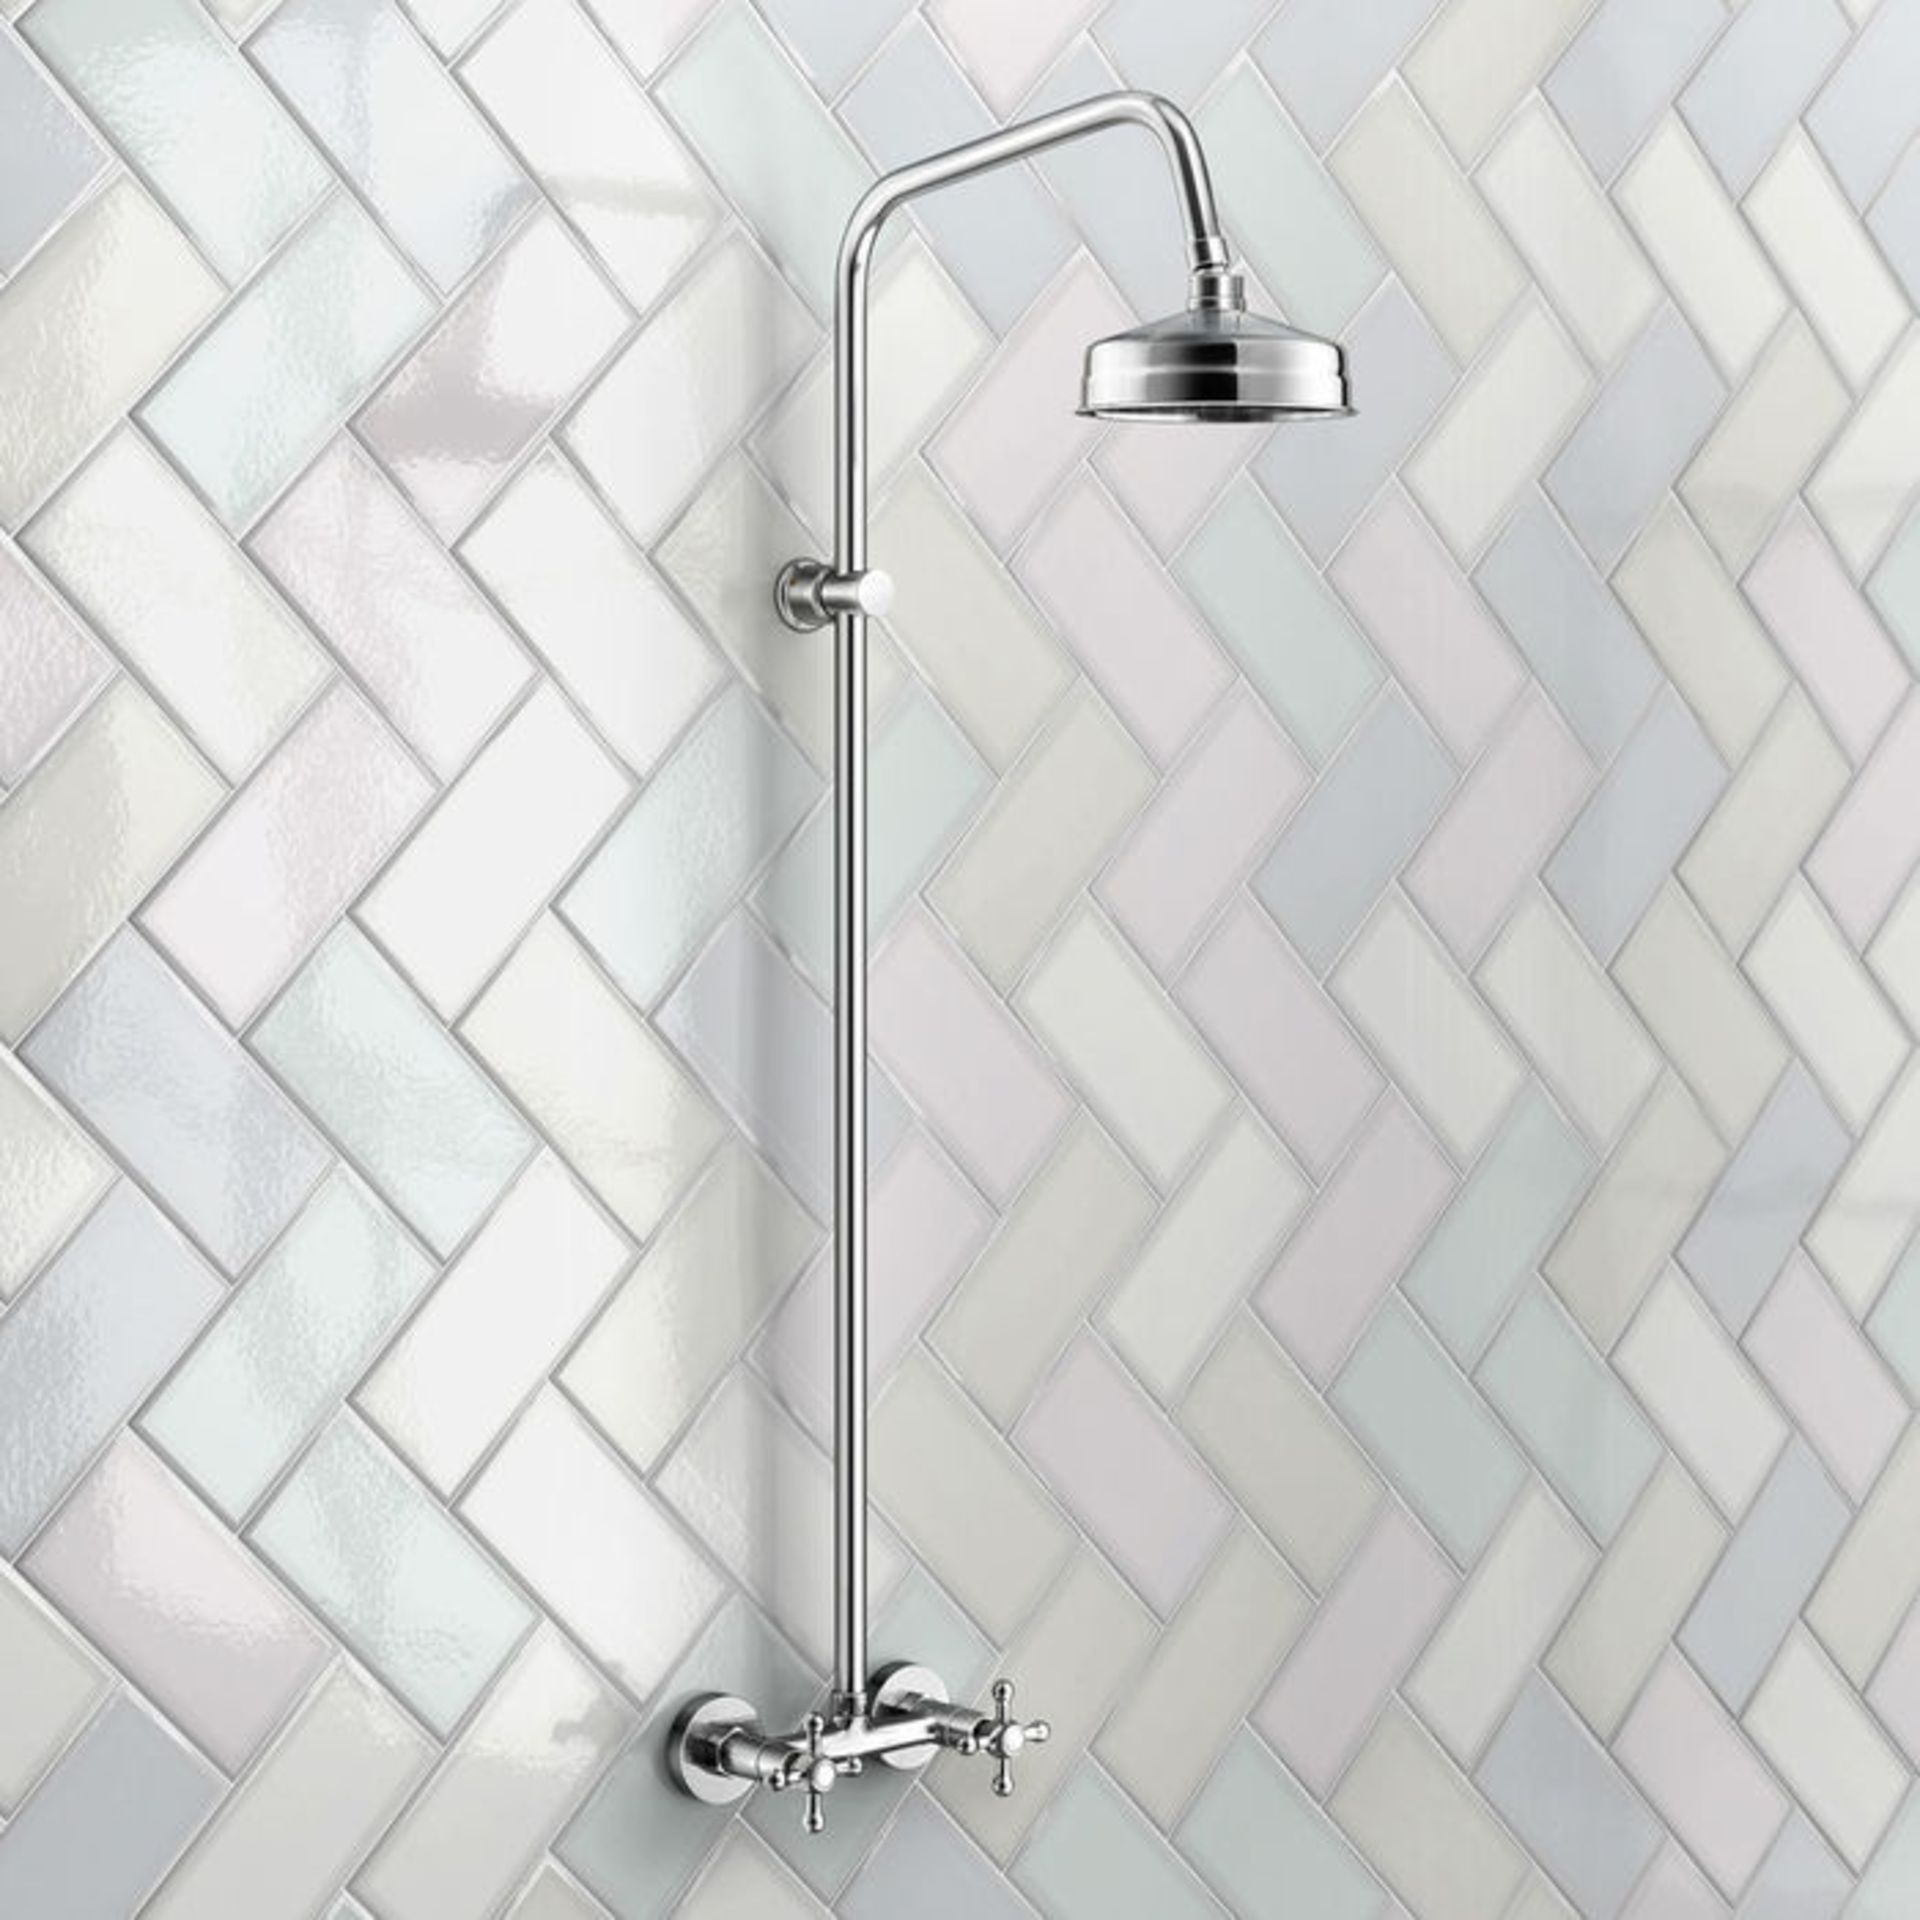 (TP109) Traditional Exposed Shower & Medium Head Exposed design makes for a statement piece Stunning - Image 3 of 3